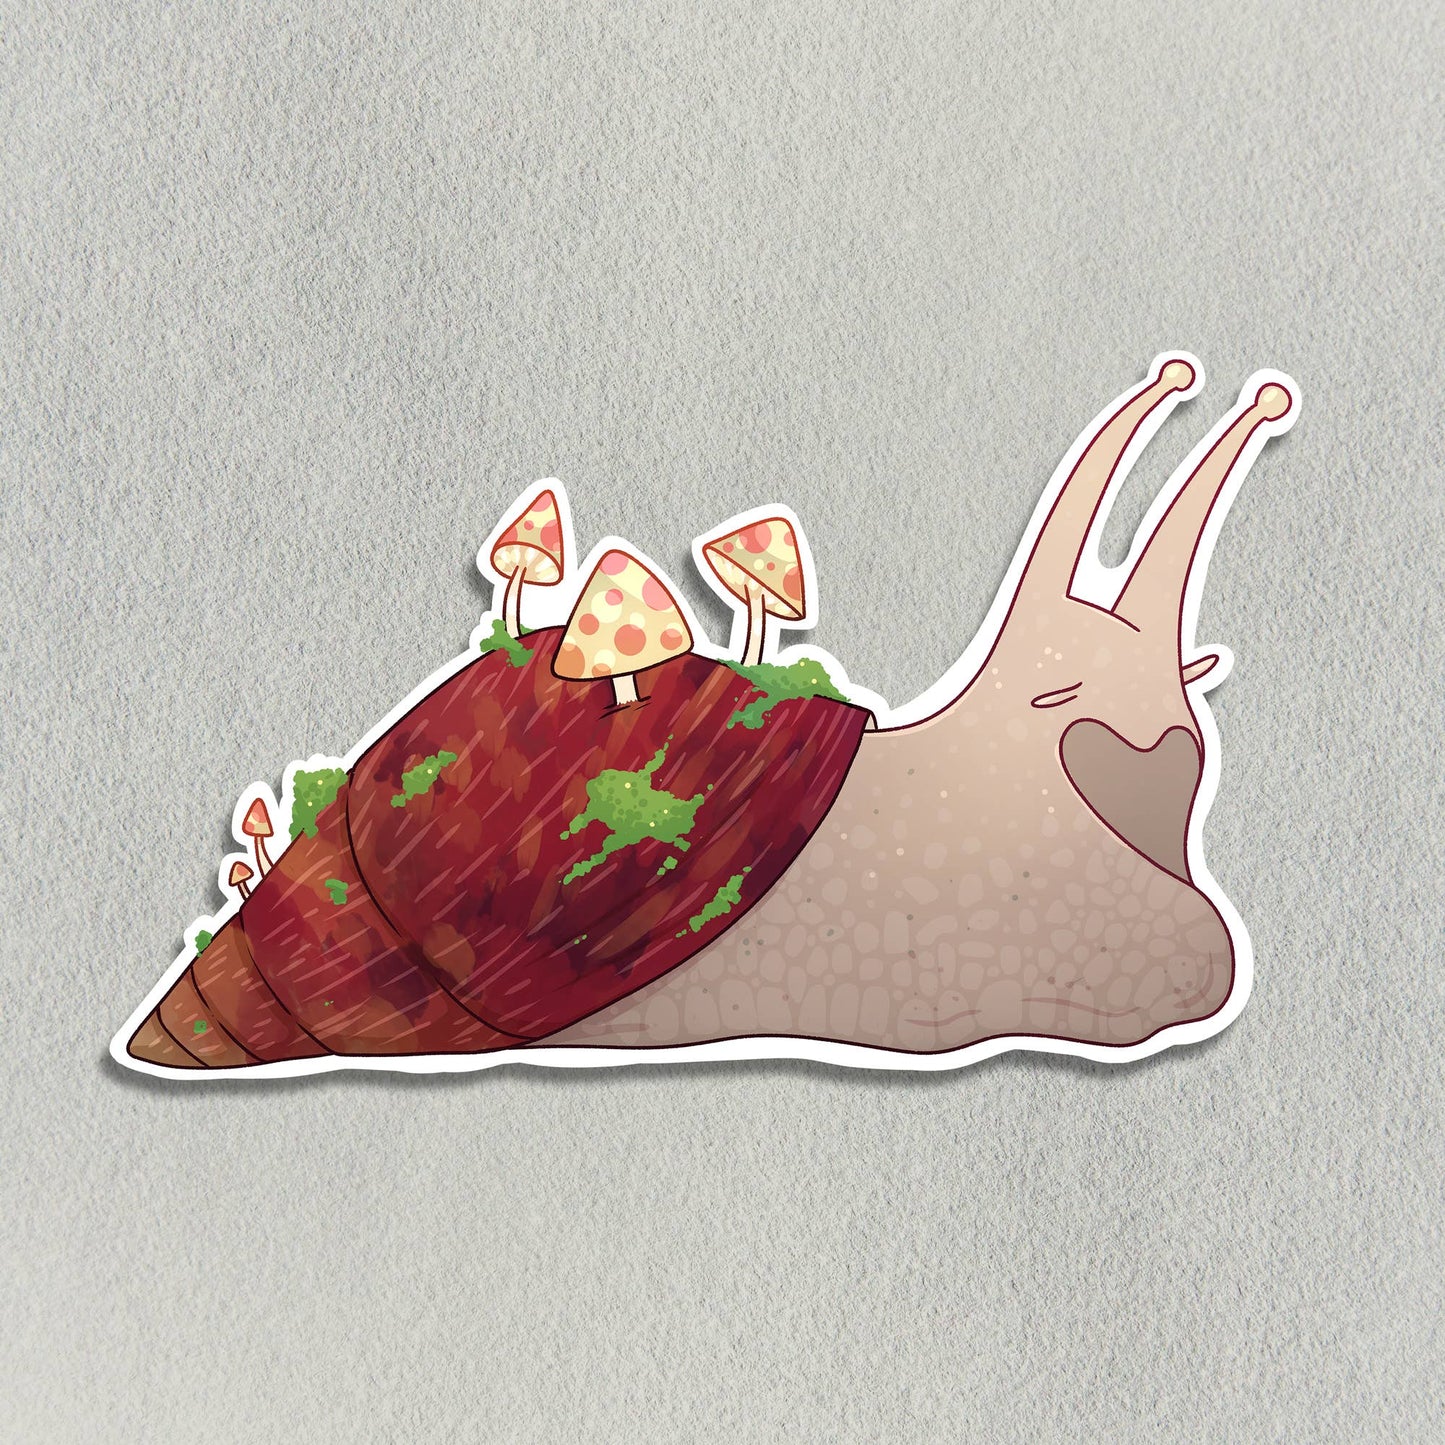 Adorable Snail With Mushrooms On it's Shell Sticker